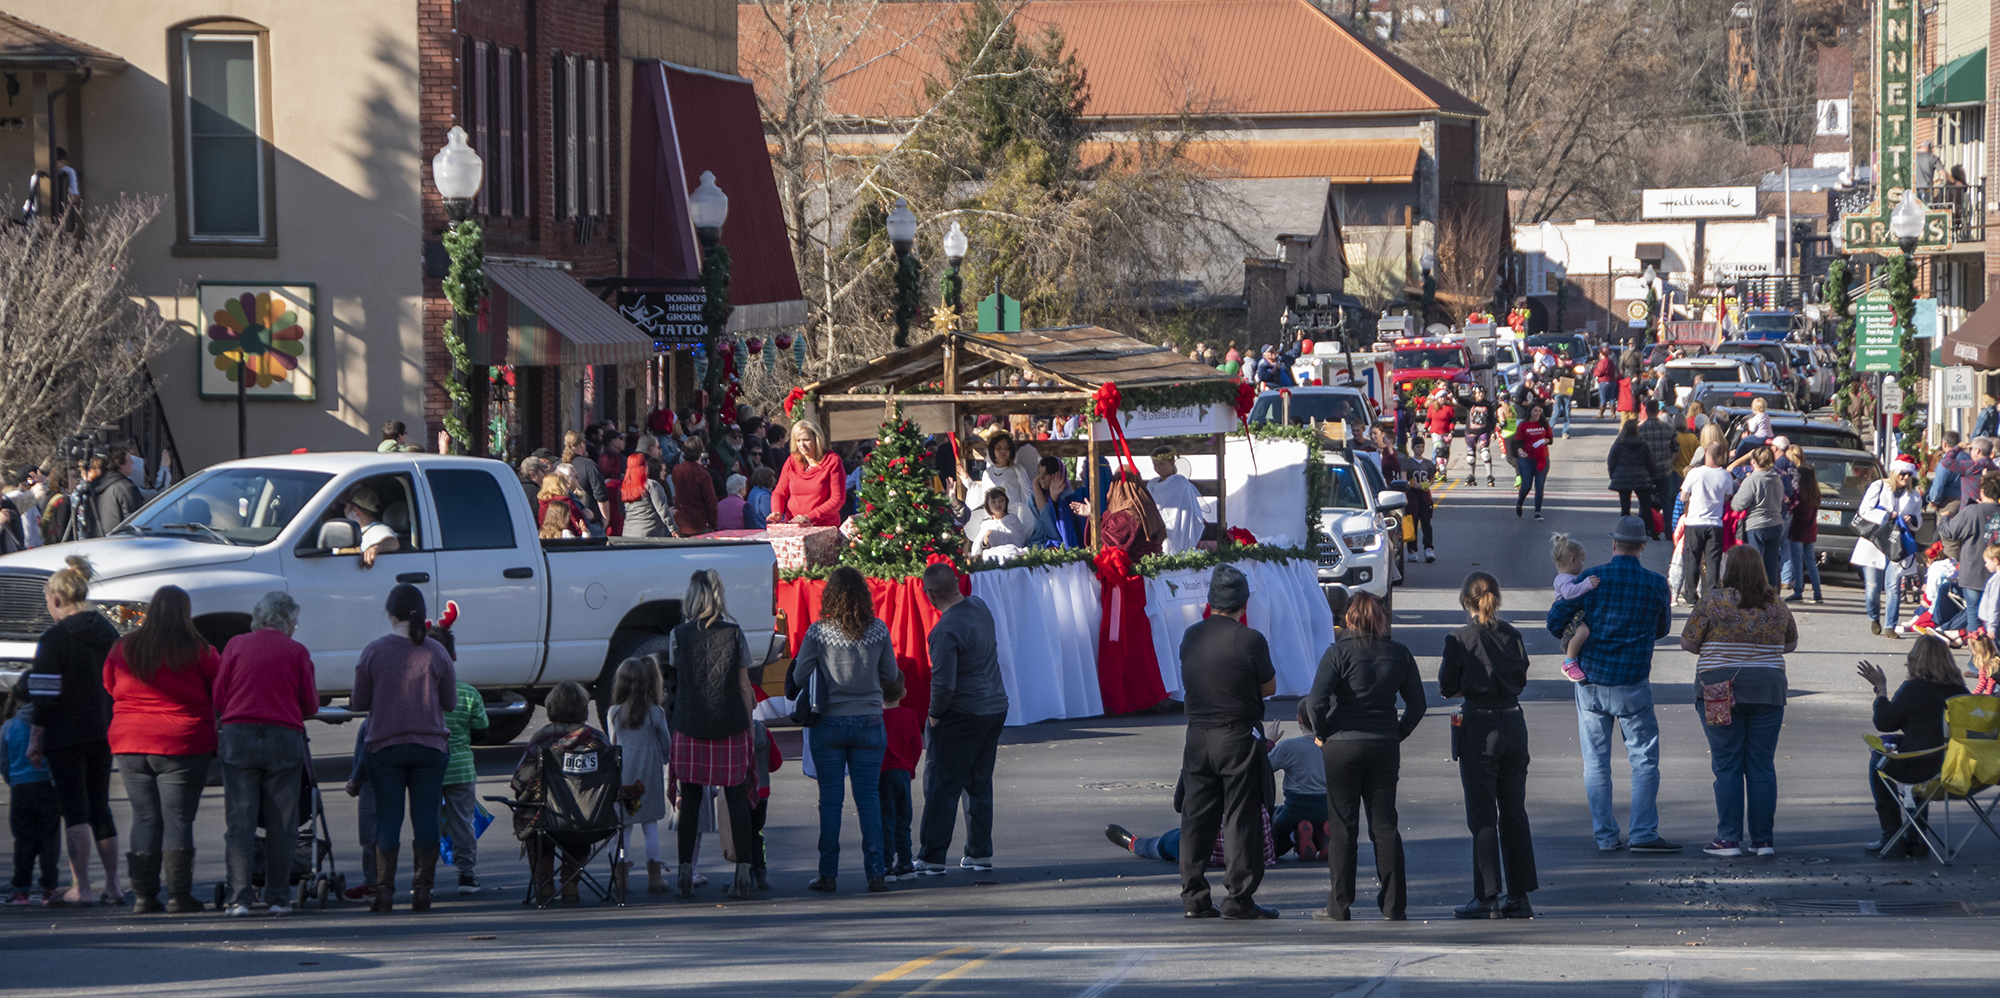 Annual Christmas Parade in Bryson City NC